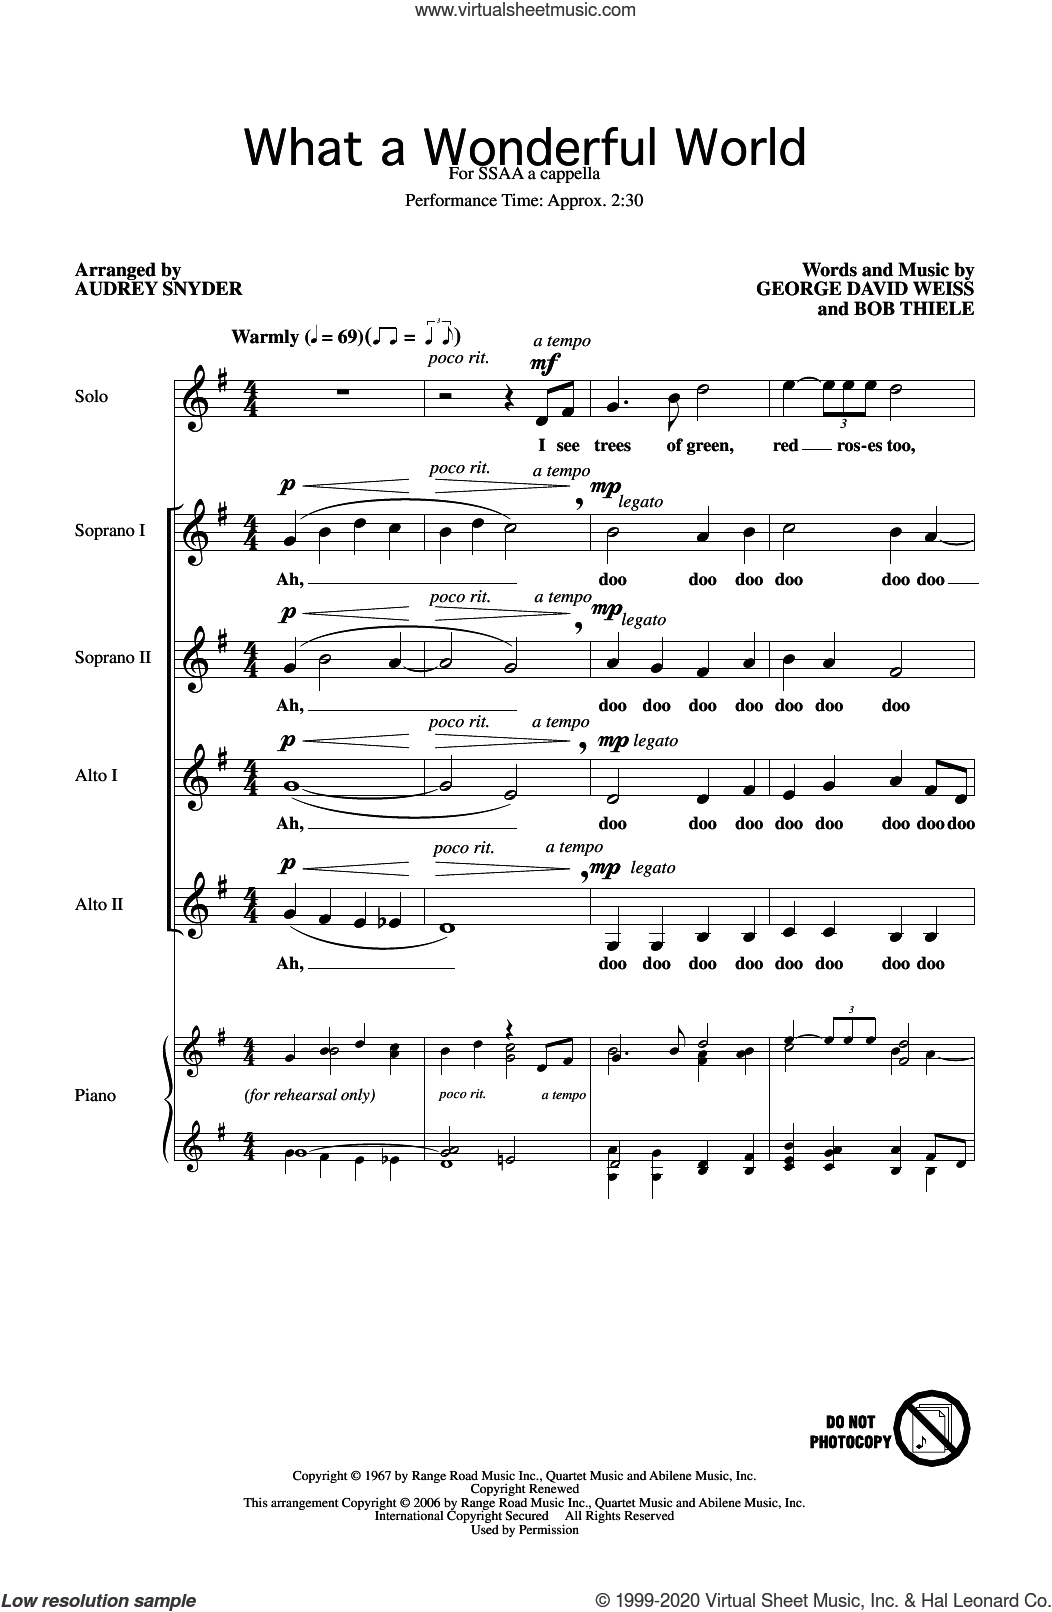 louis armstrong what a wonderful world sheet music